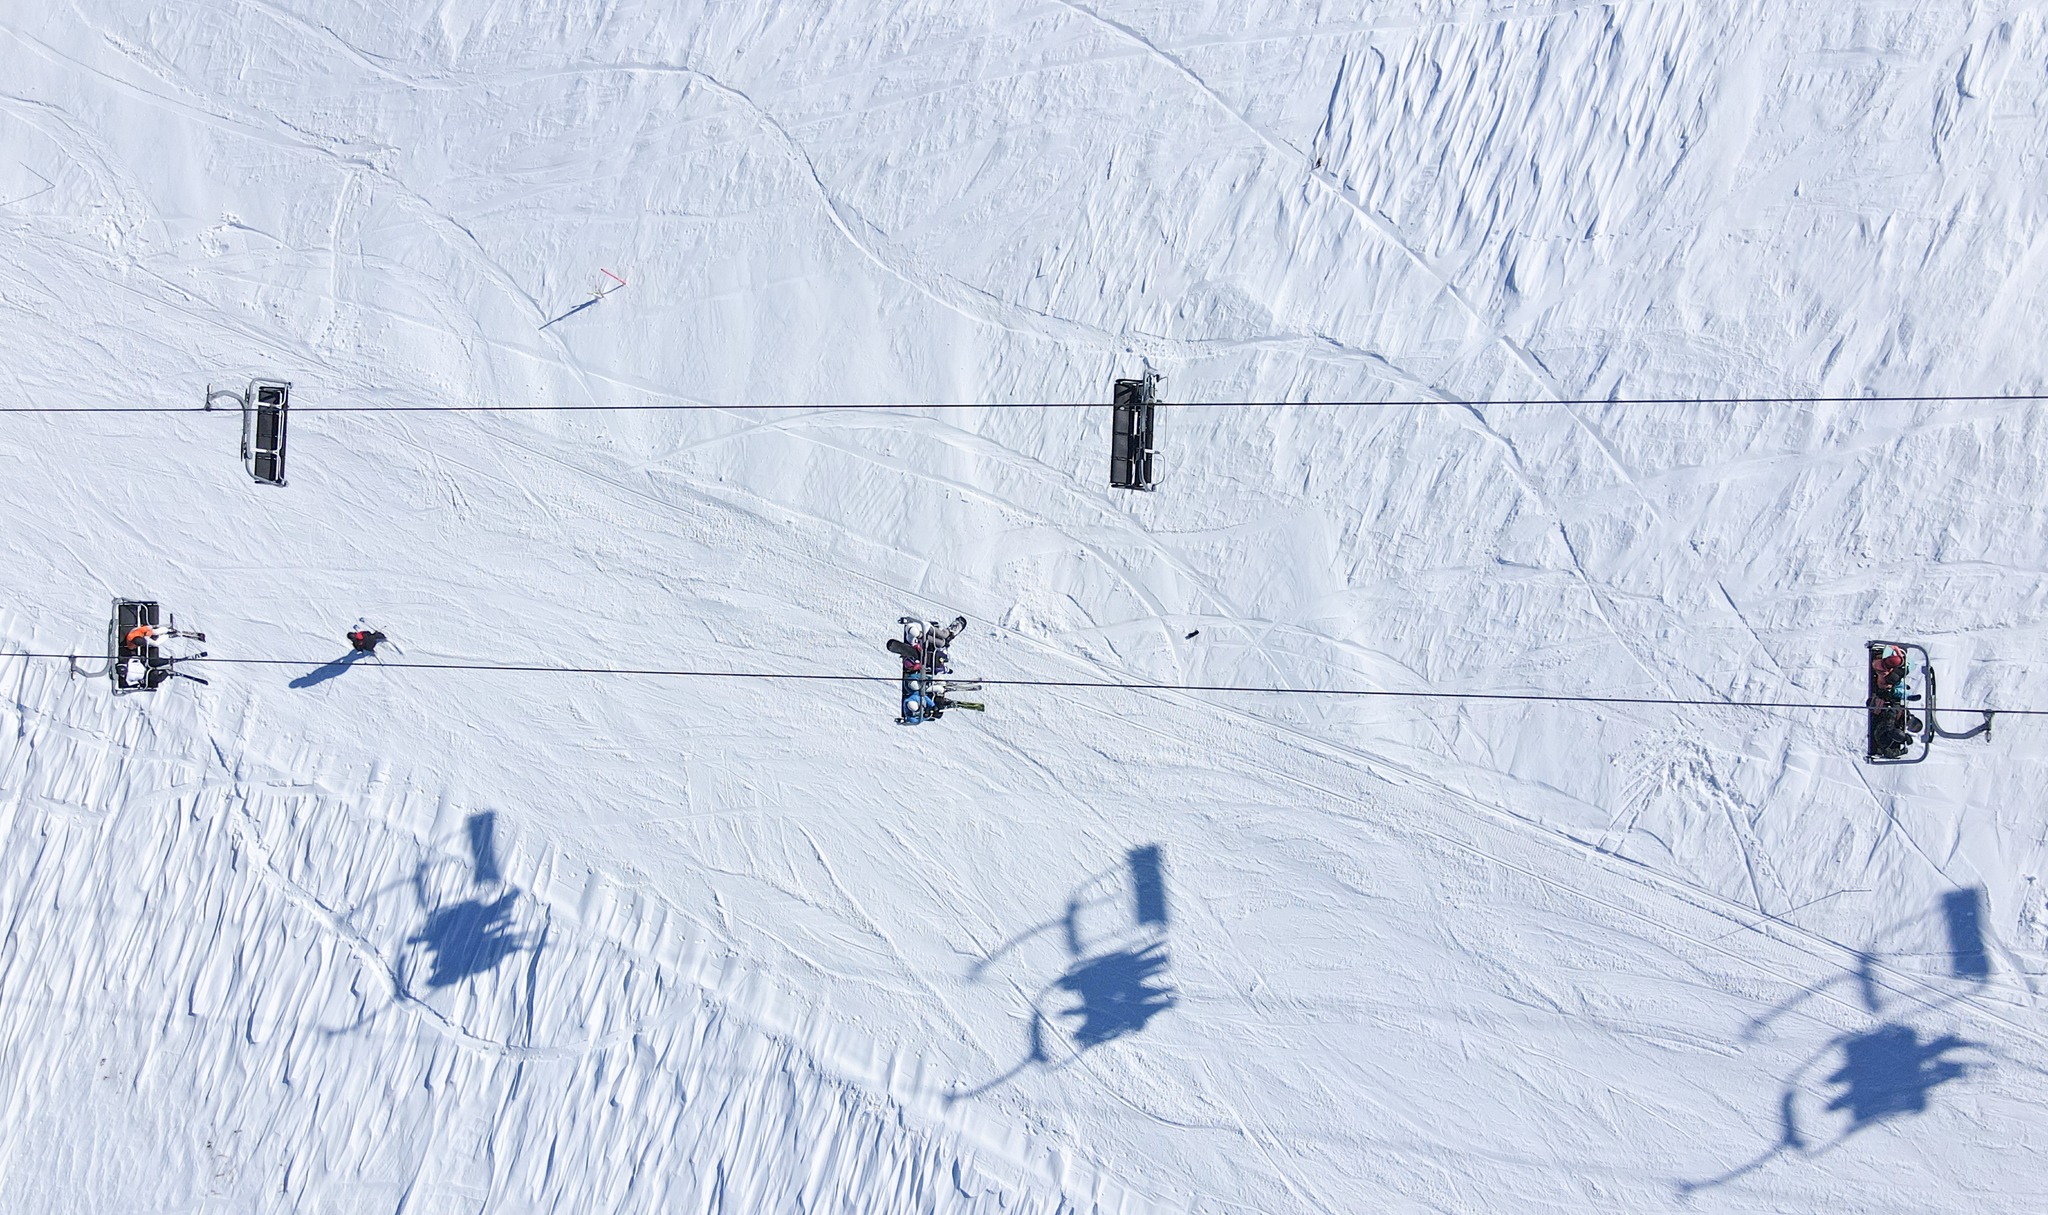 aerial shot of a chairlift over slope, the shadows of moving chairs reflected on white snow